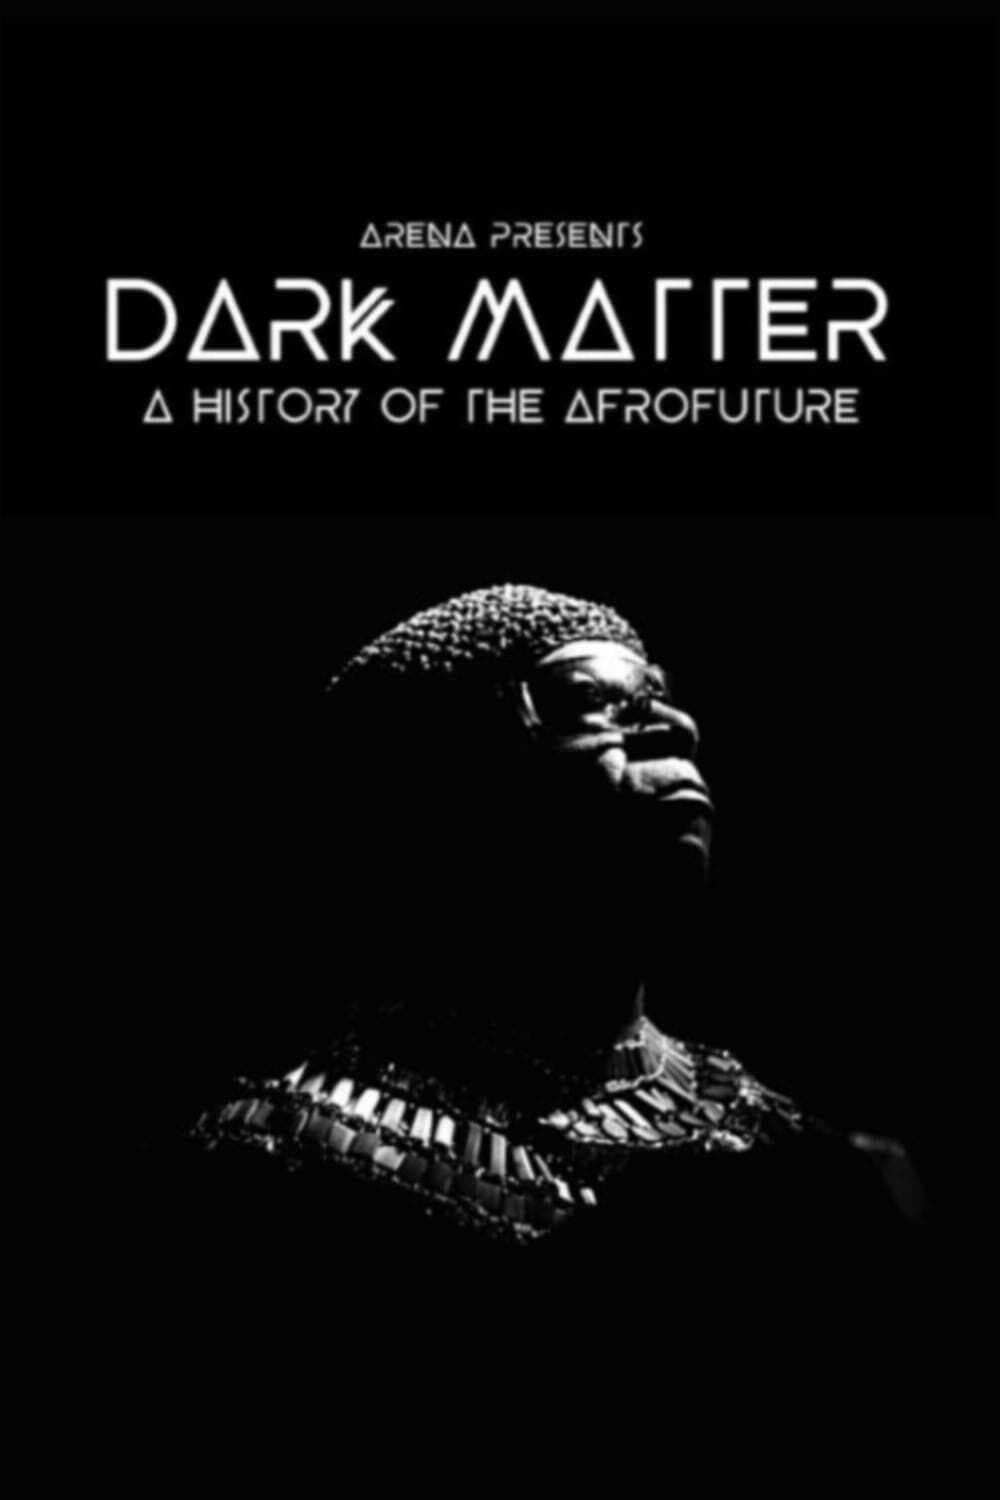 Dark Matter: A History of the Afrofuture (2021)